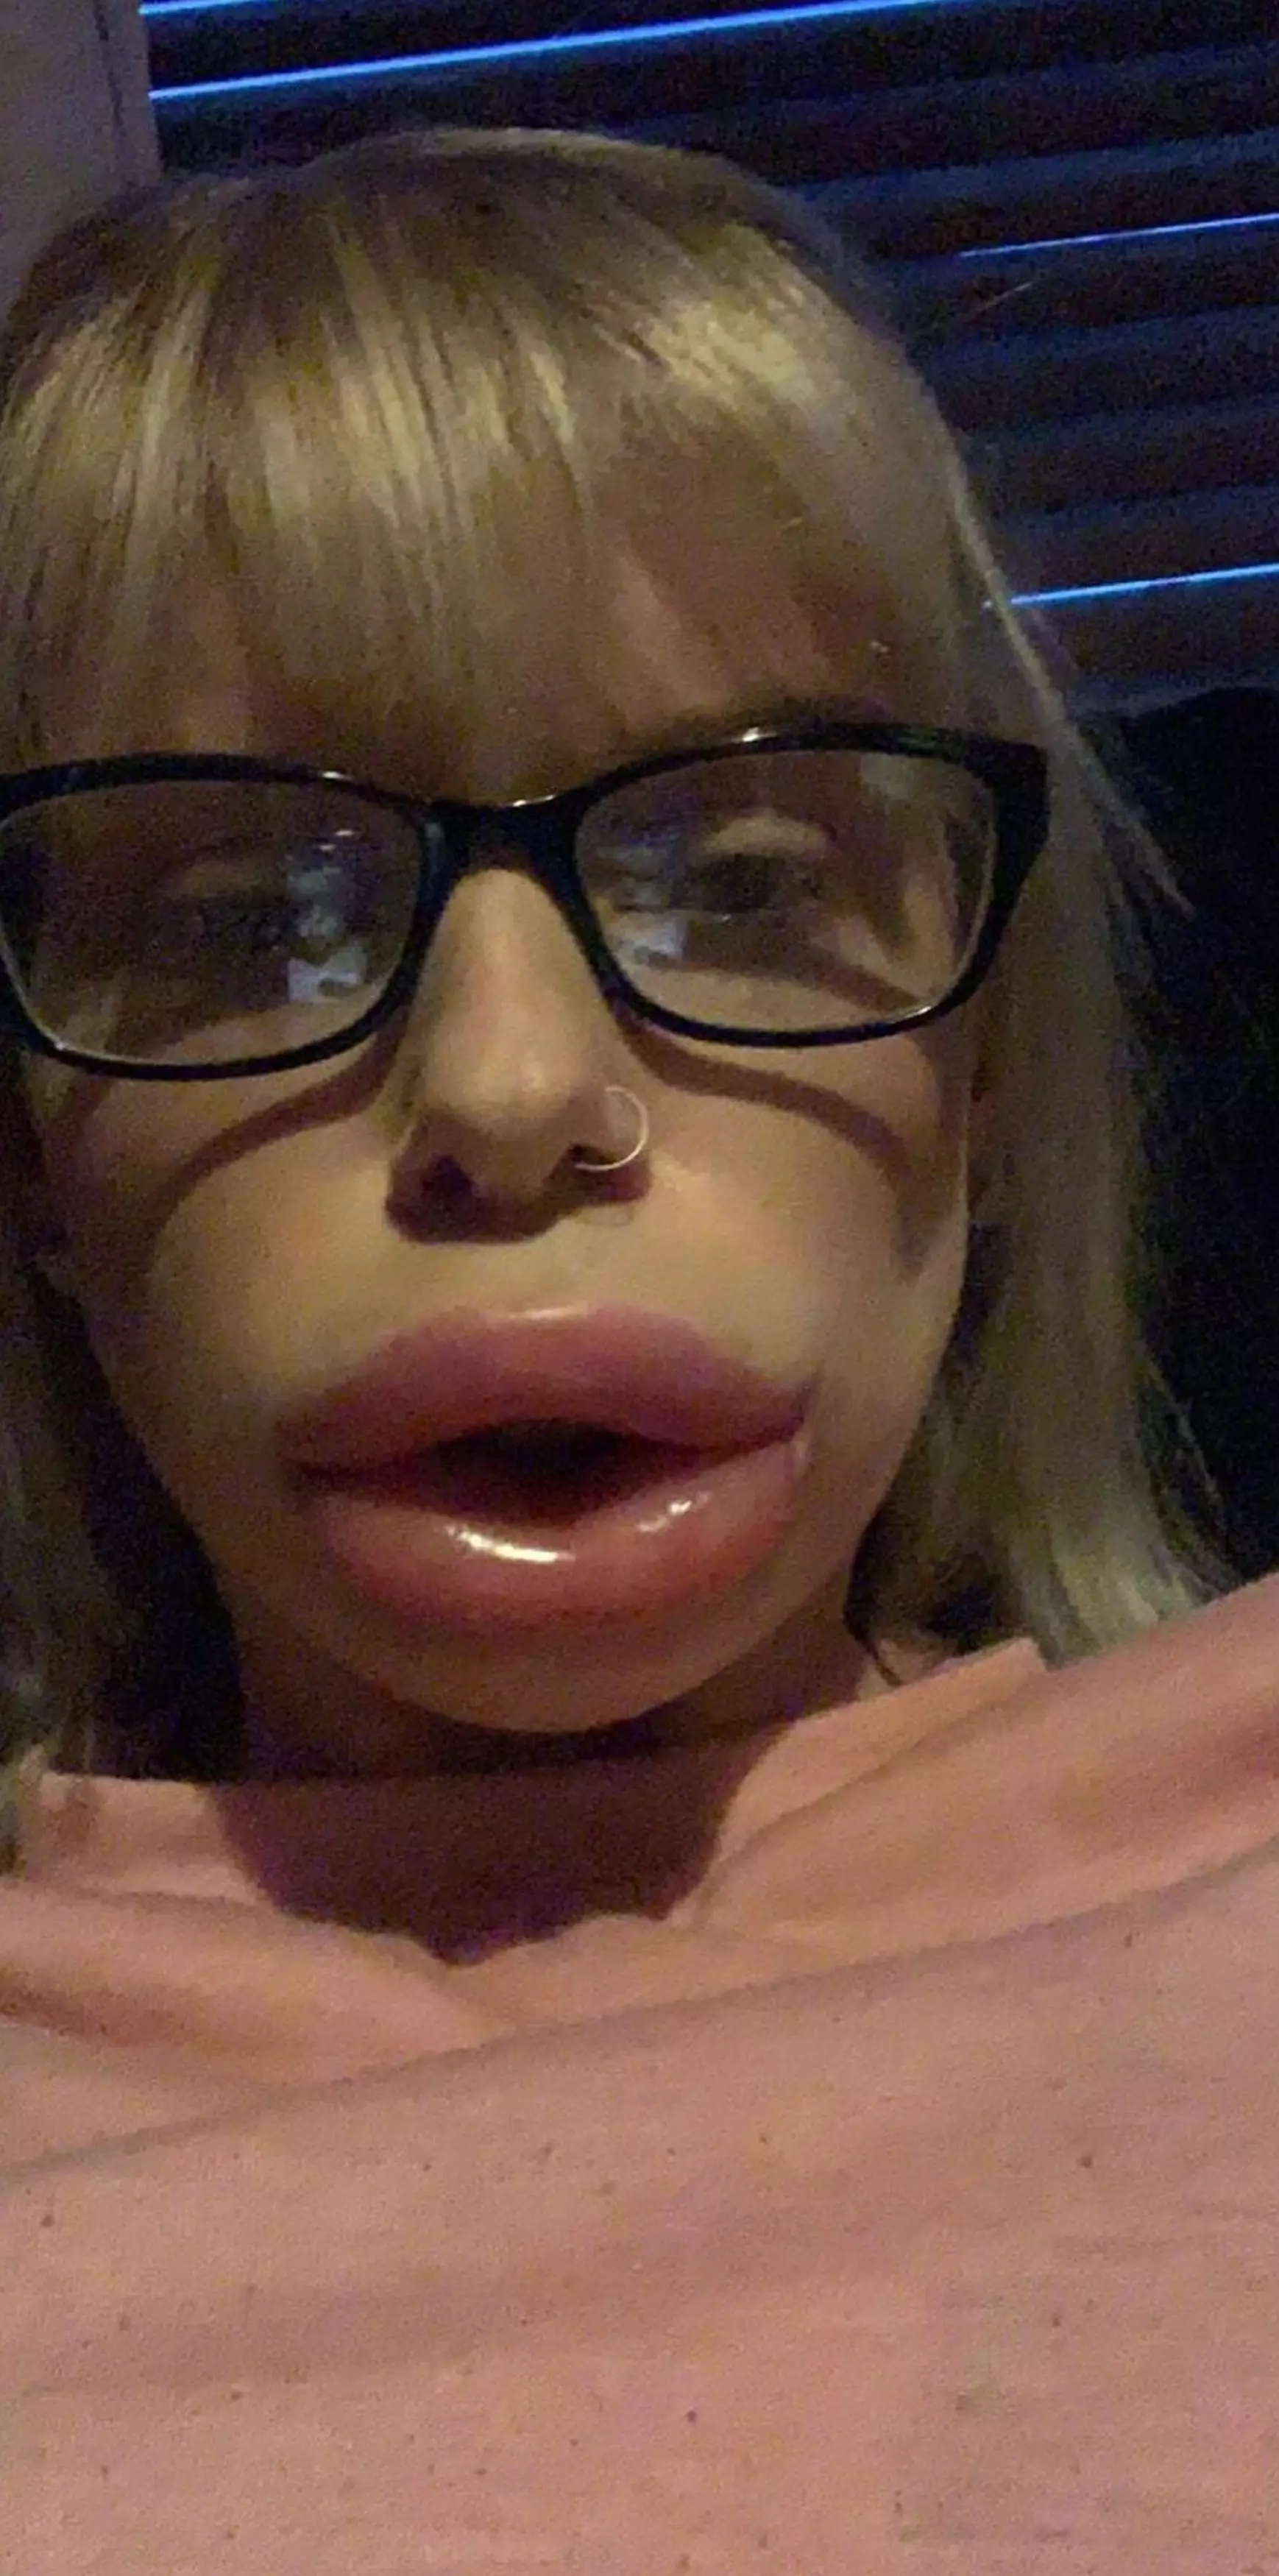 Christina's lips just hours after she had fillers.